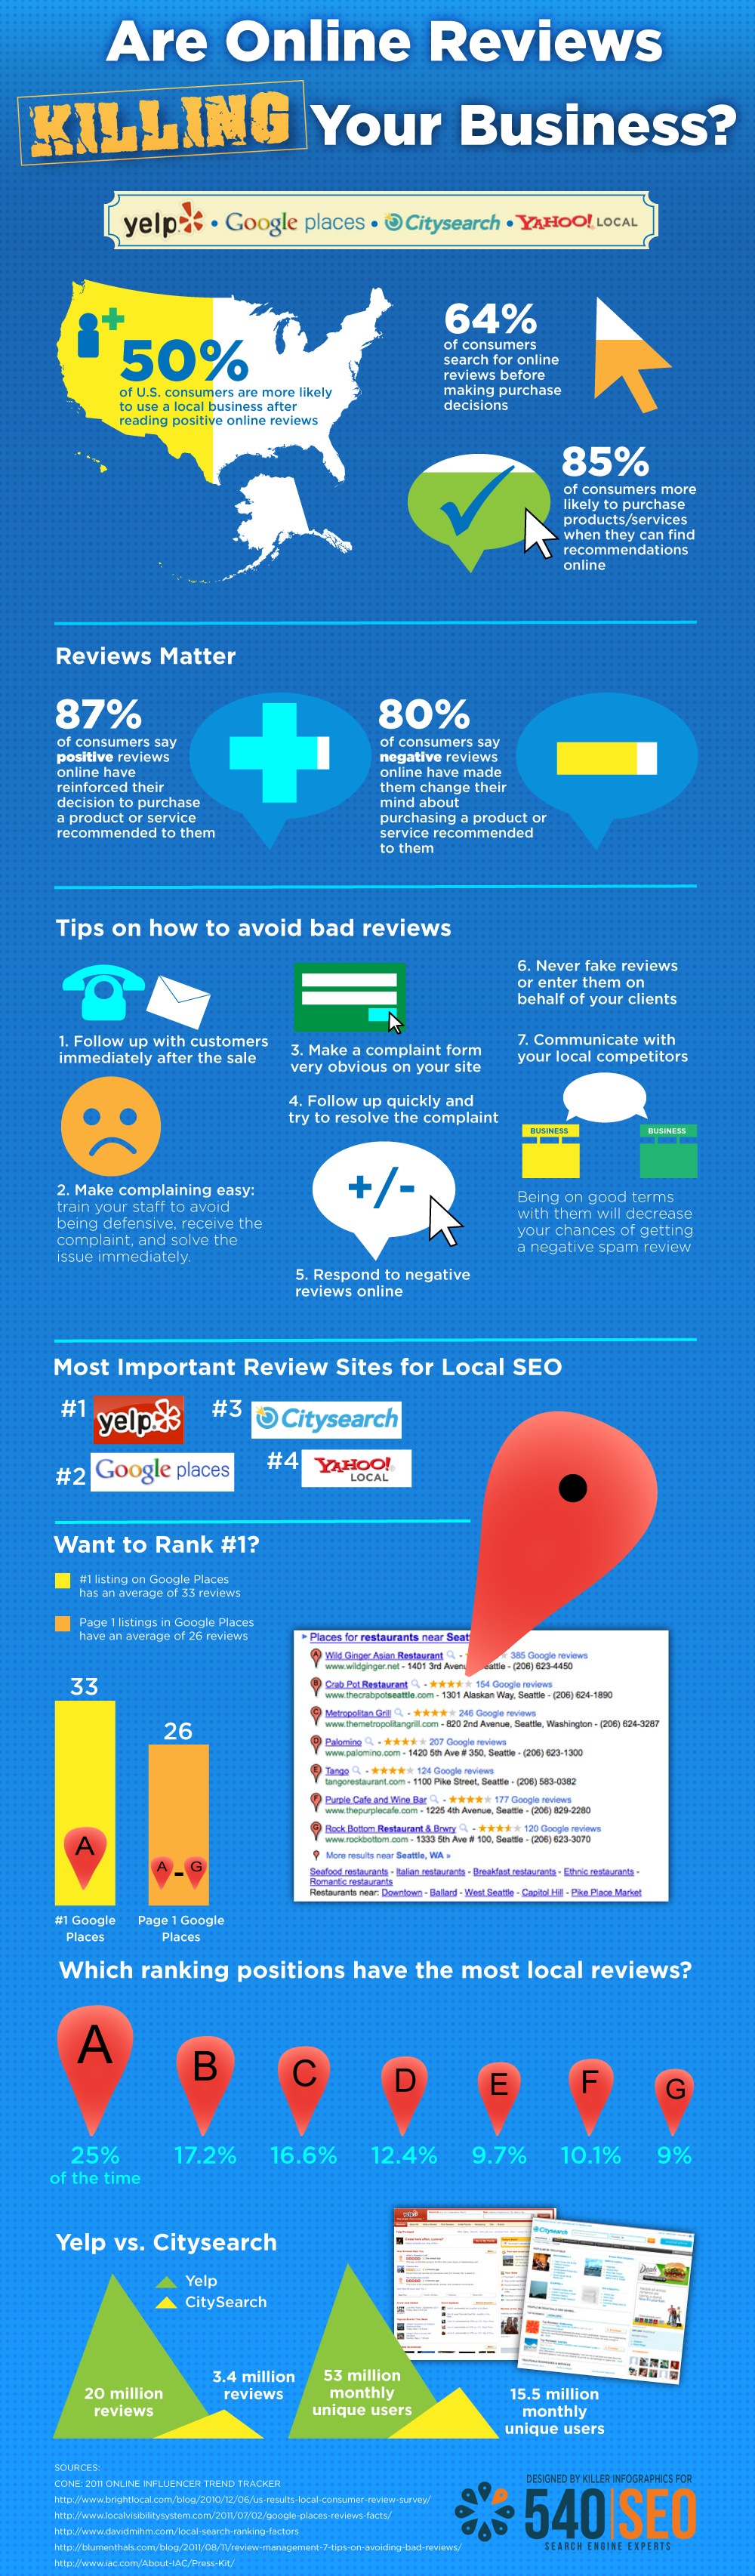 Review Buzz Infographic on the Power of Reviews